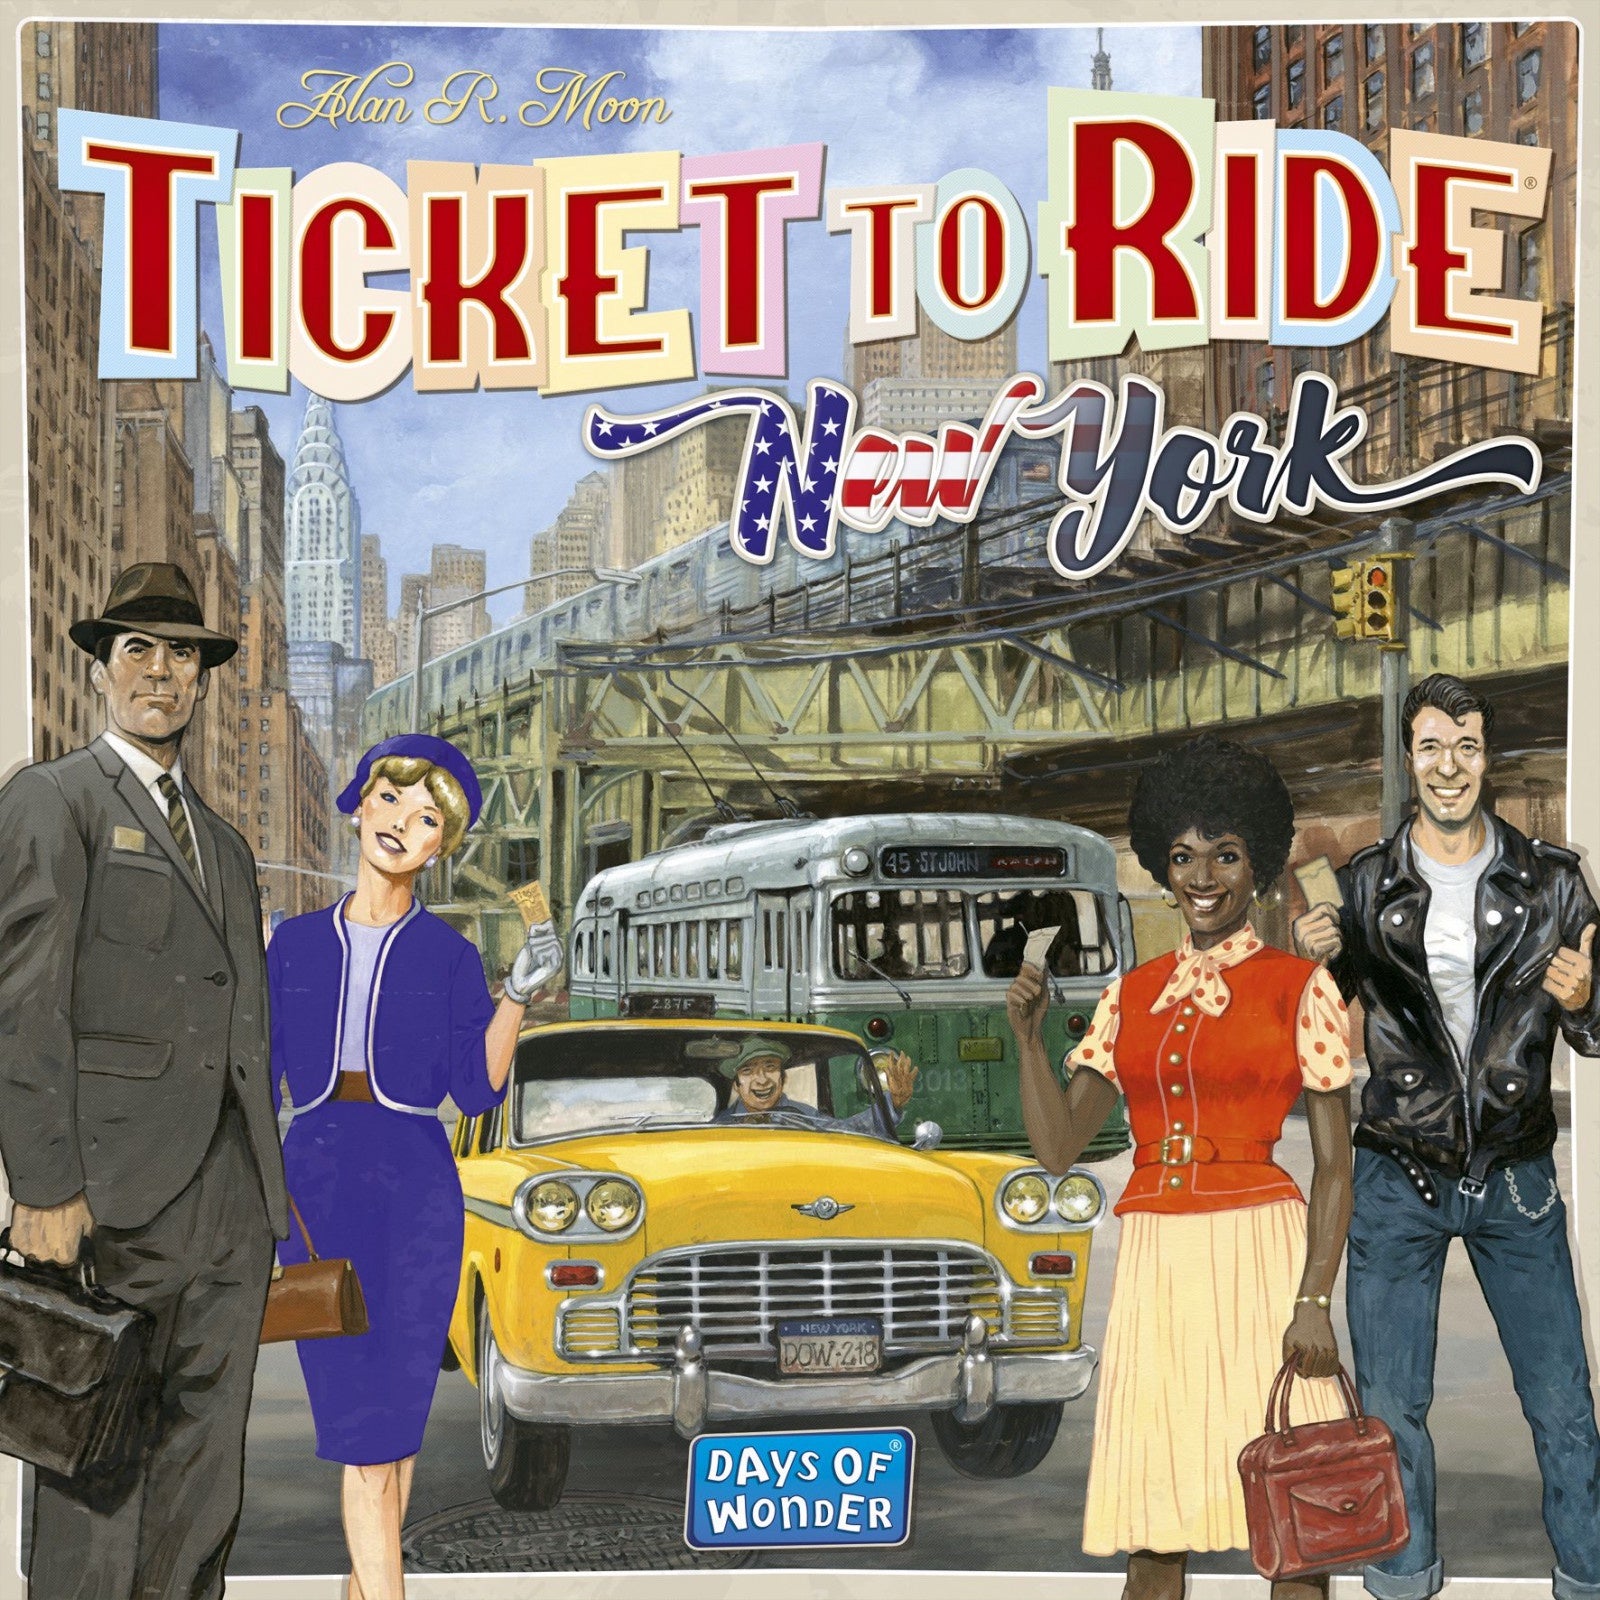 TICKET TO RIDE - New York - Expansion